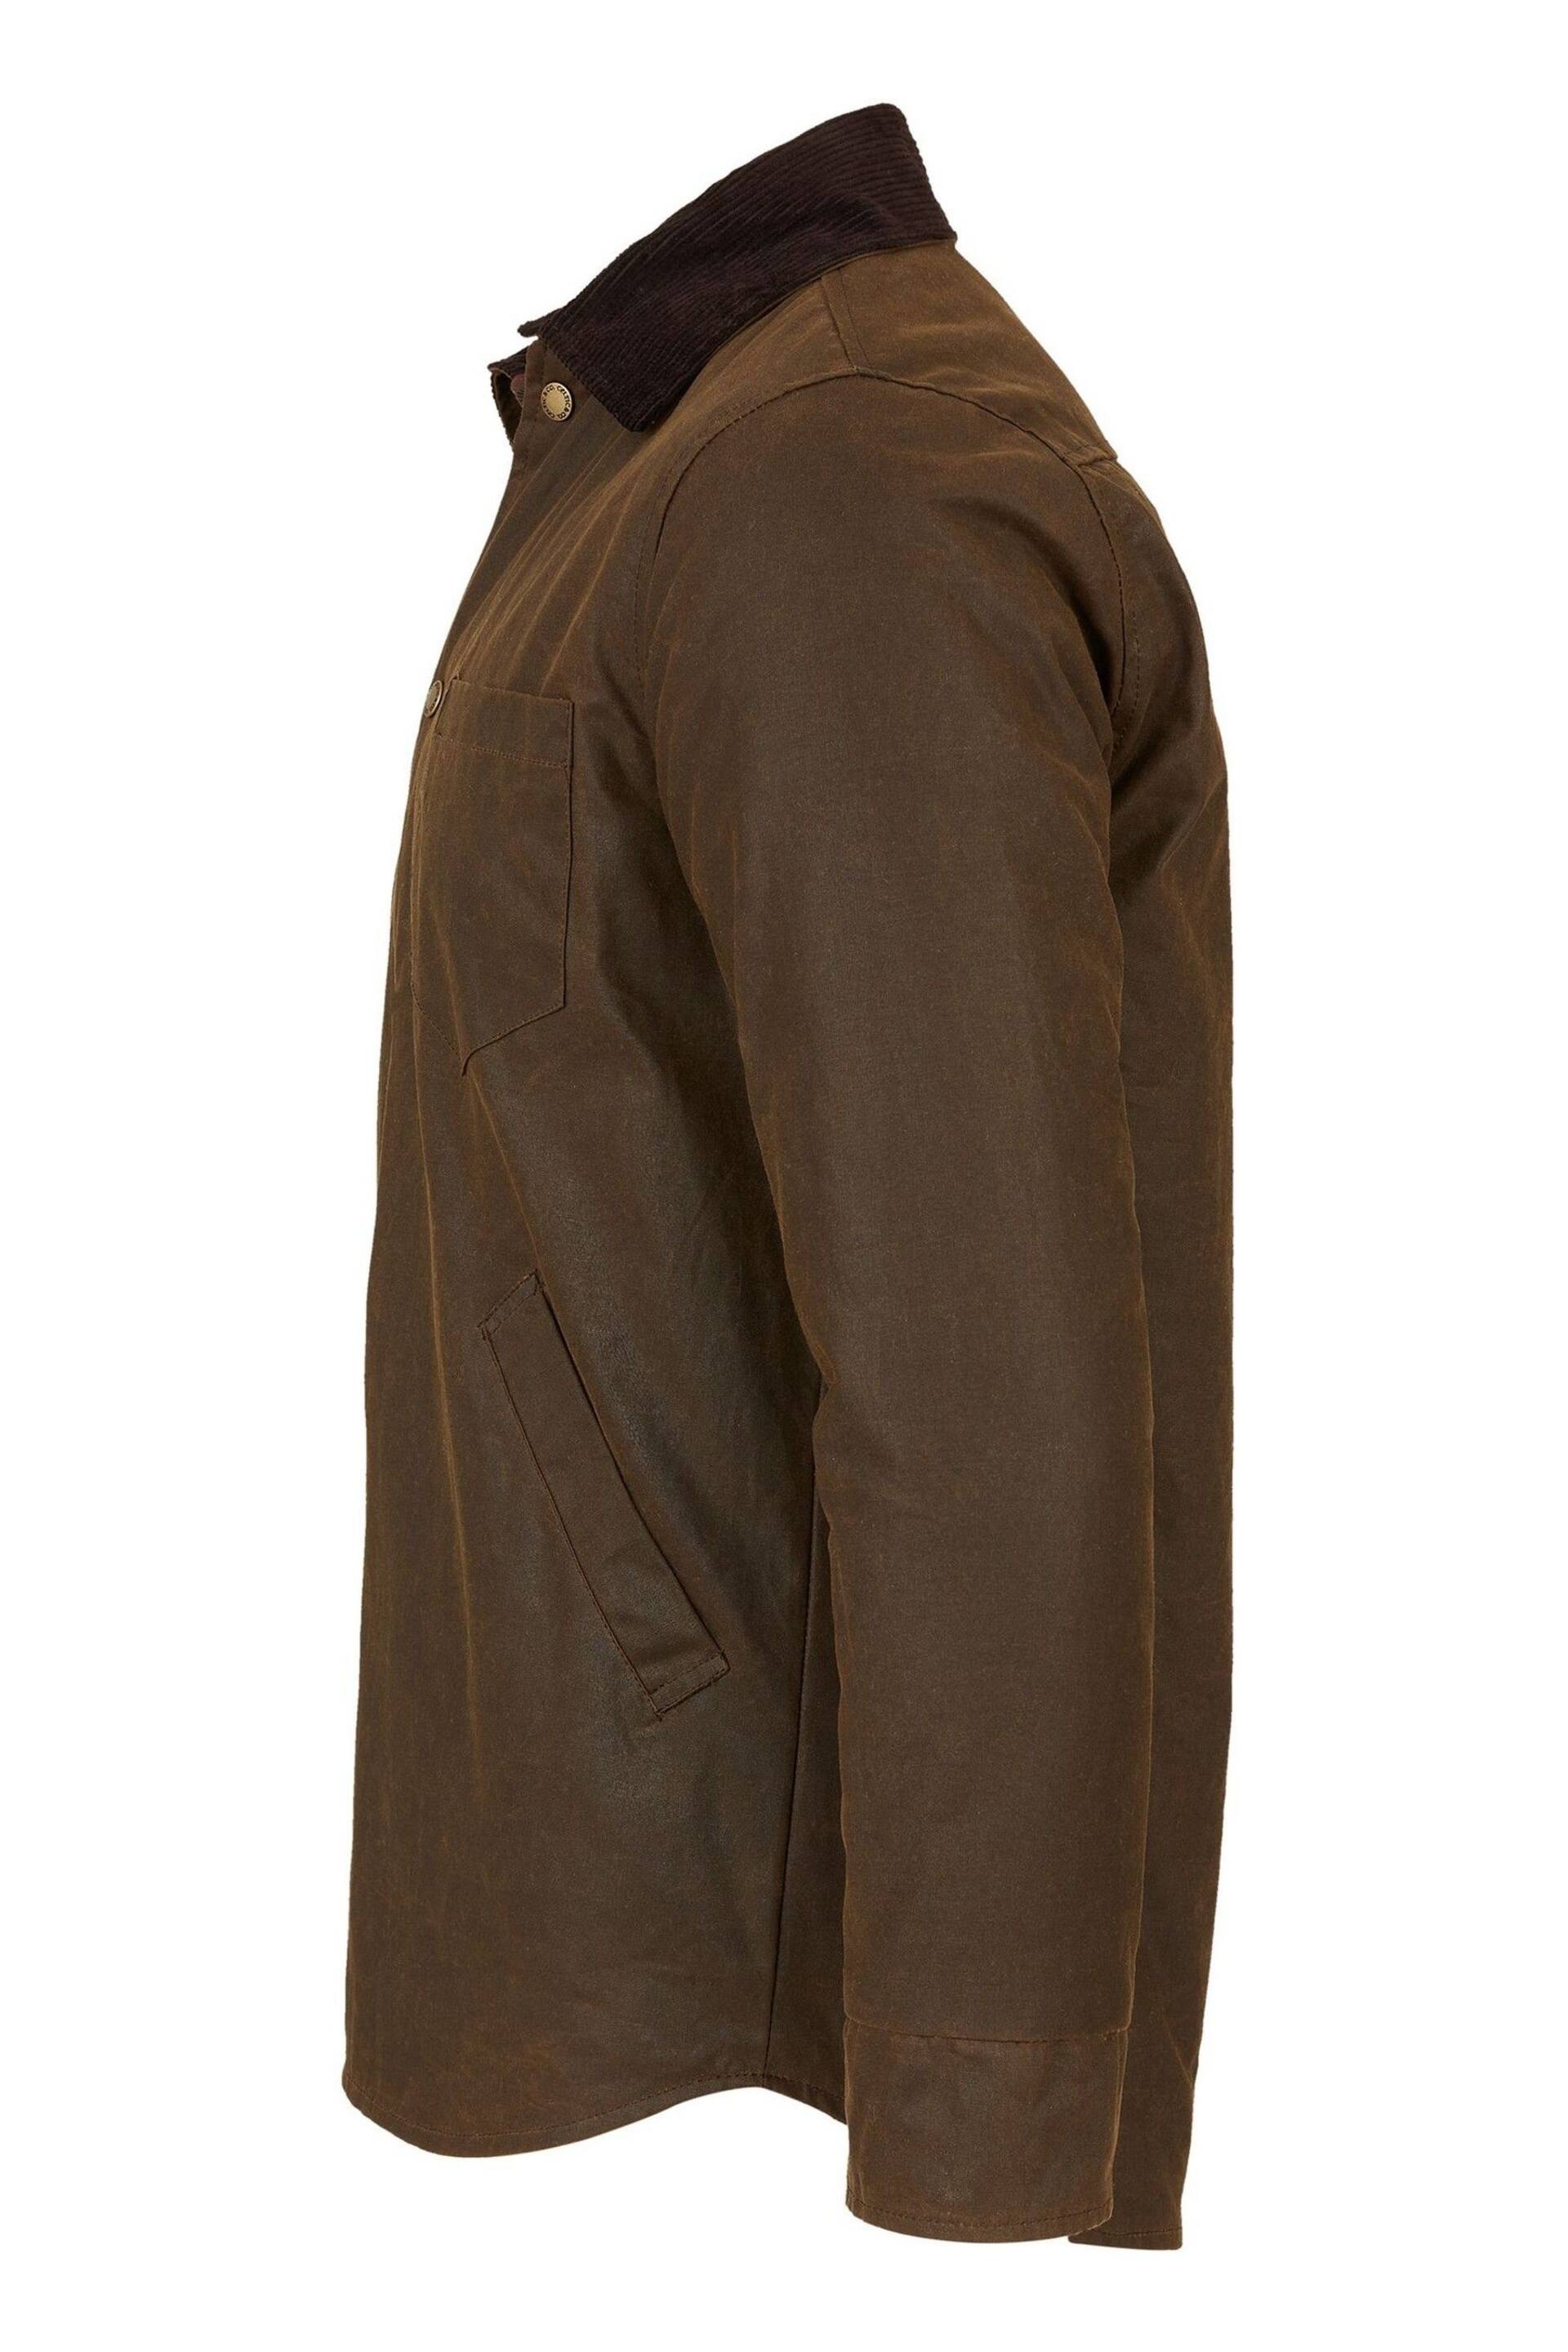 Celtic & Co. Mens Waxed Brown Cotton Overshirt - Image 7 of 9